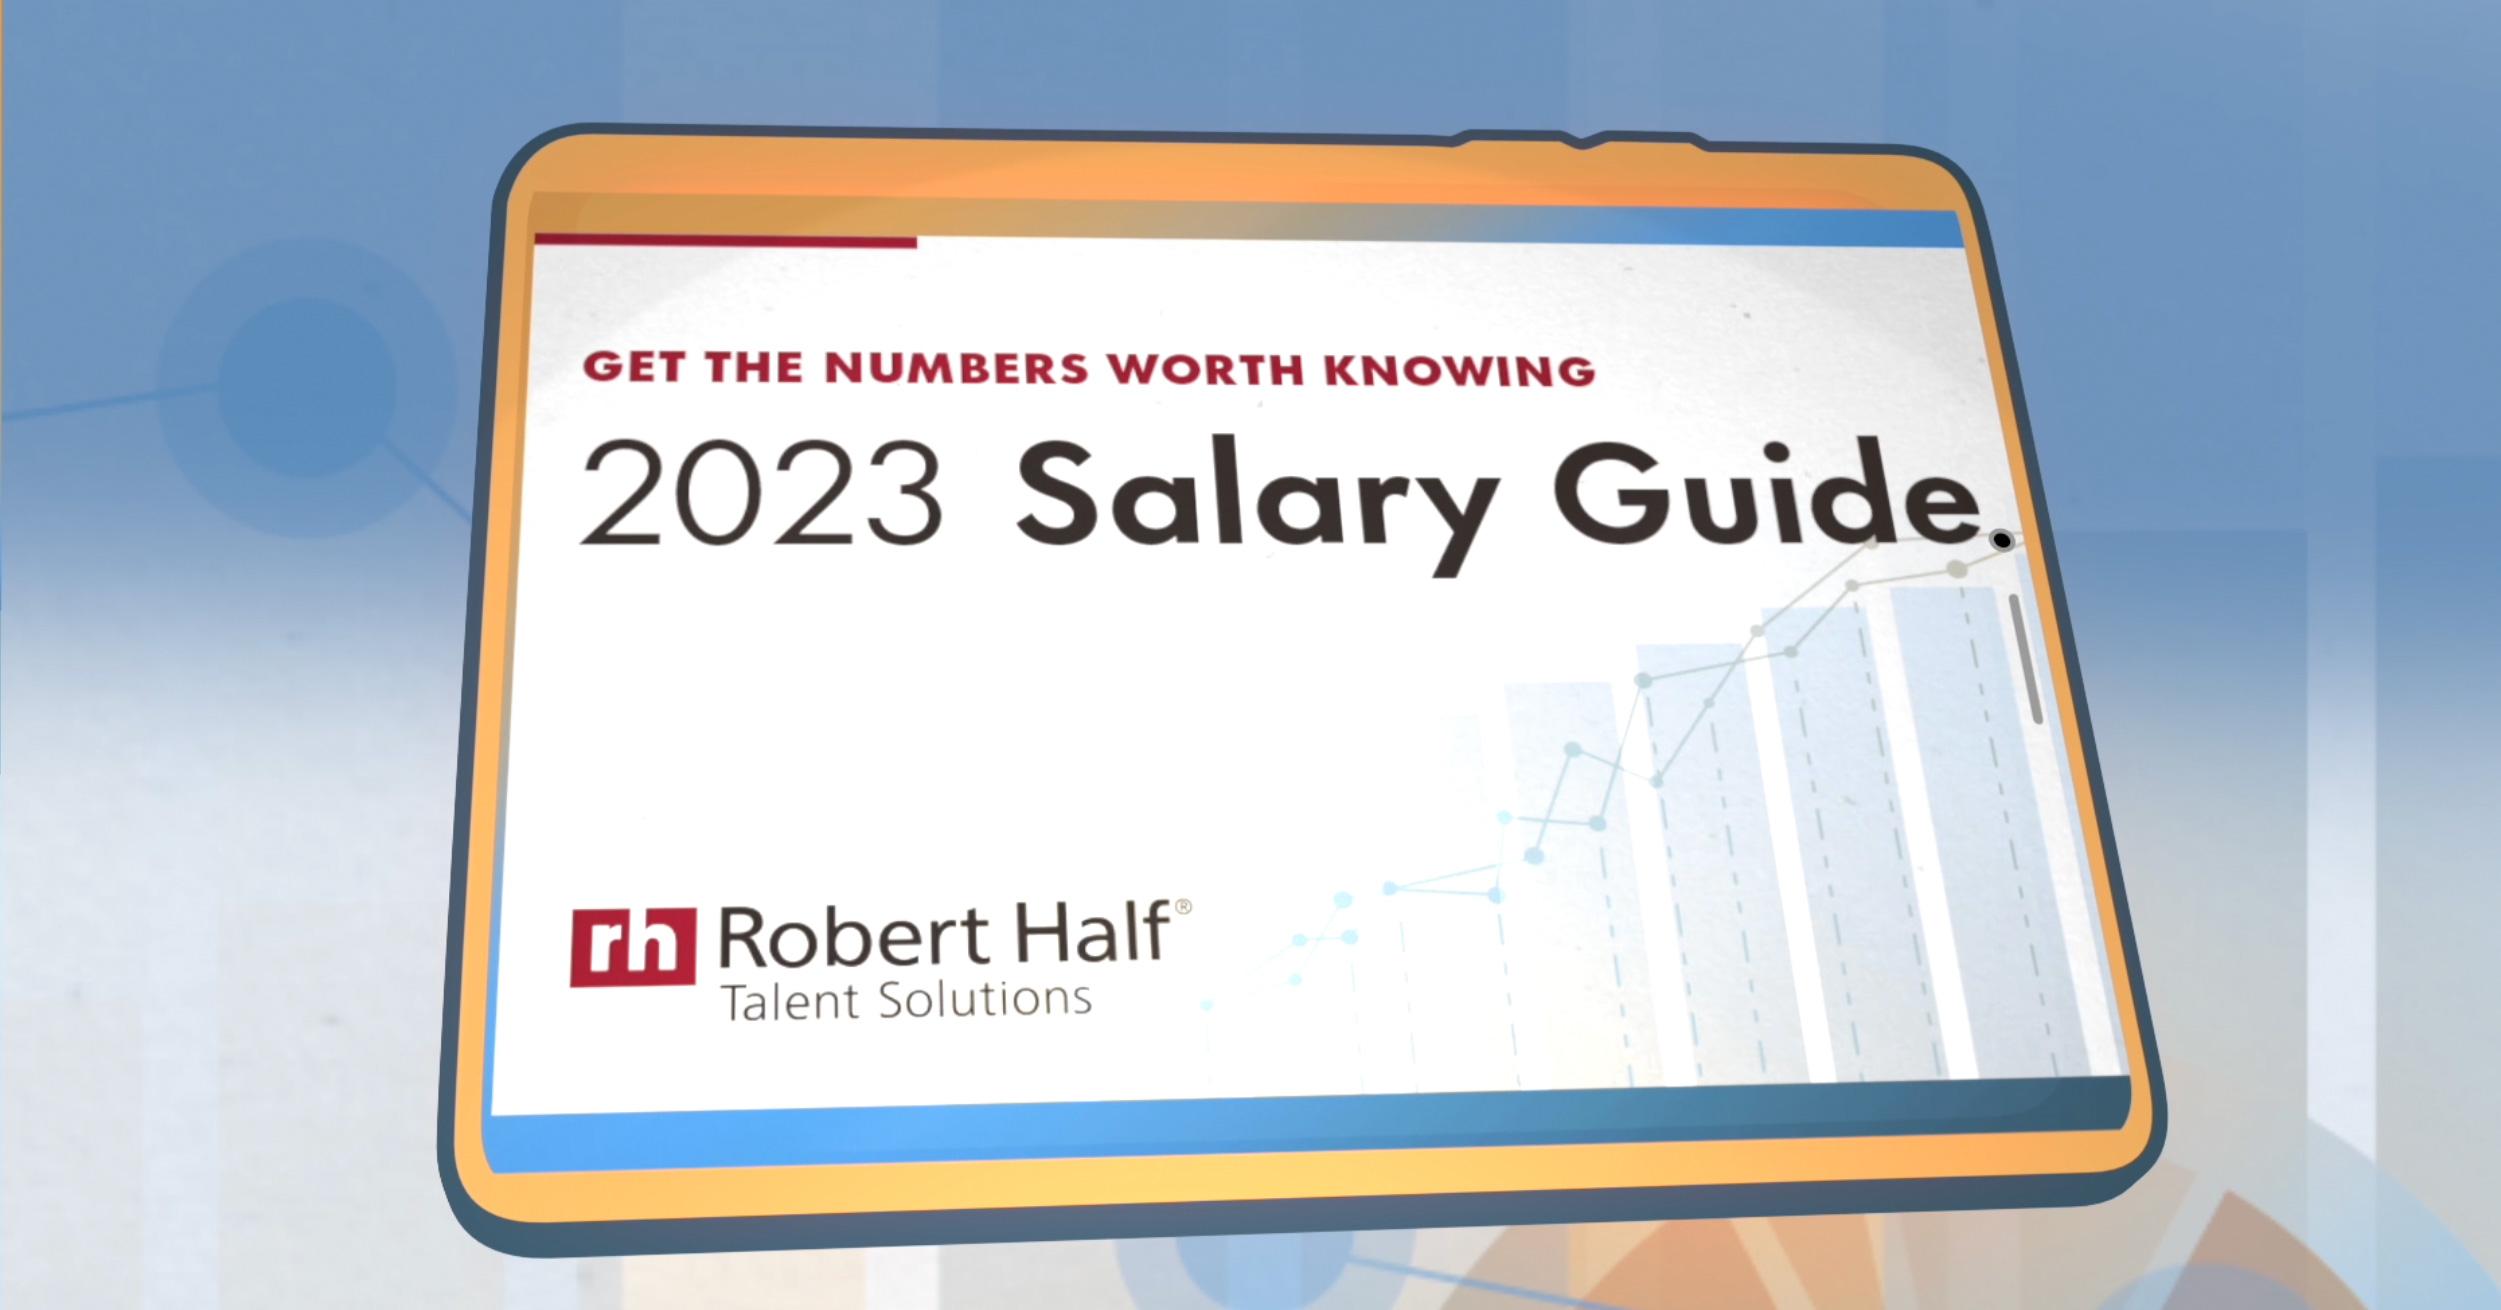 Three essential trends from the 2023 Salary Guide From Robert Half